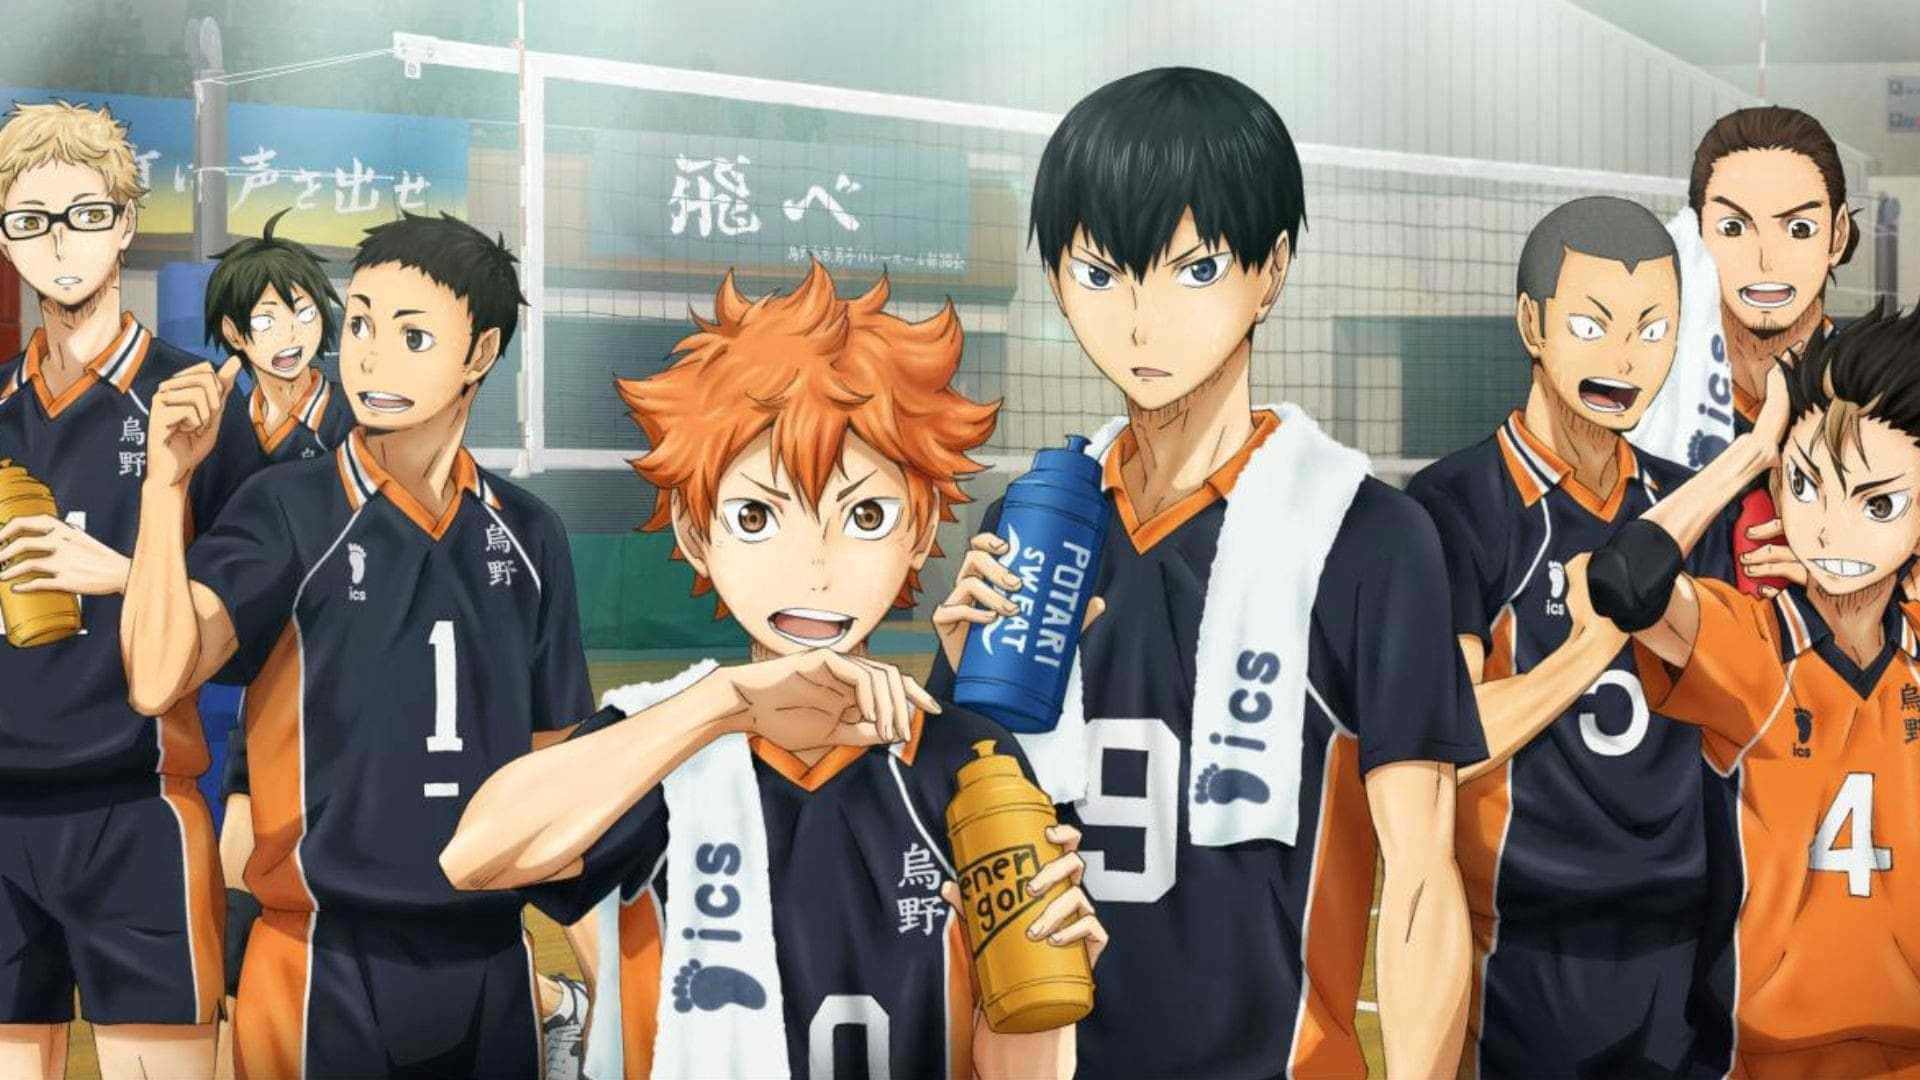 Enjoy your work or play with this Haikyuu Aesthetic Desktop Wallpaper